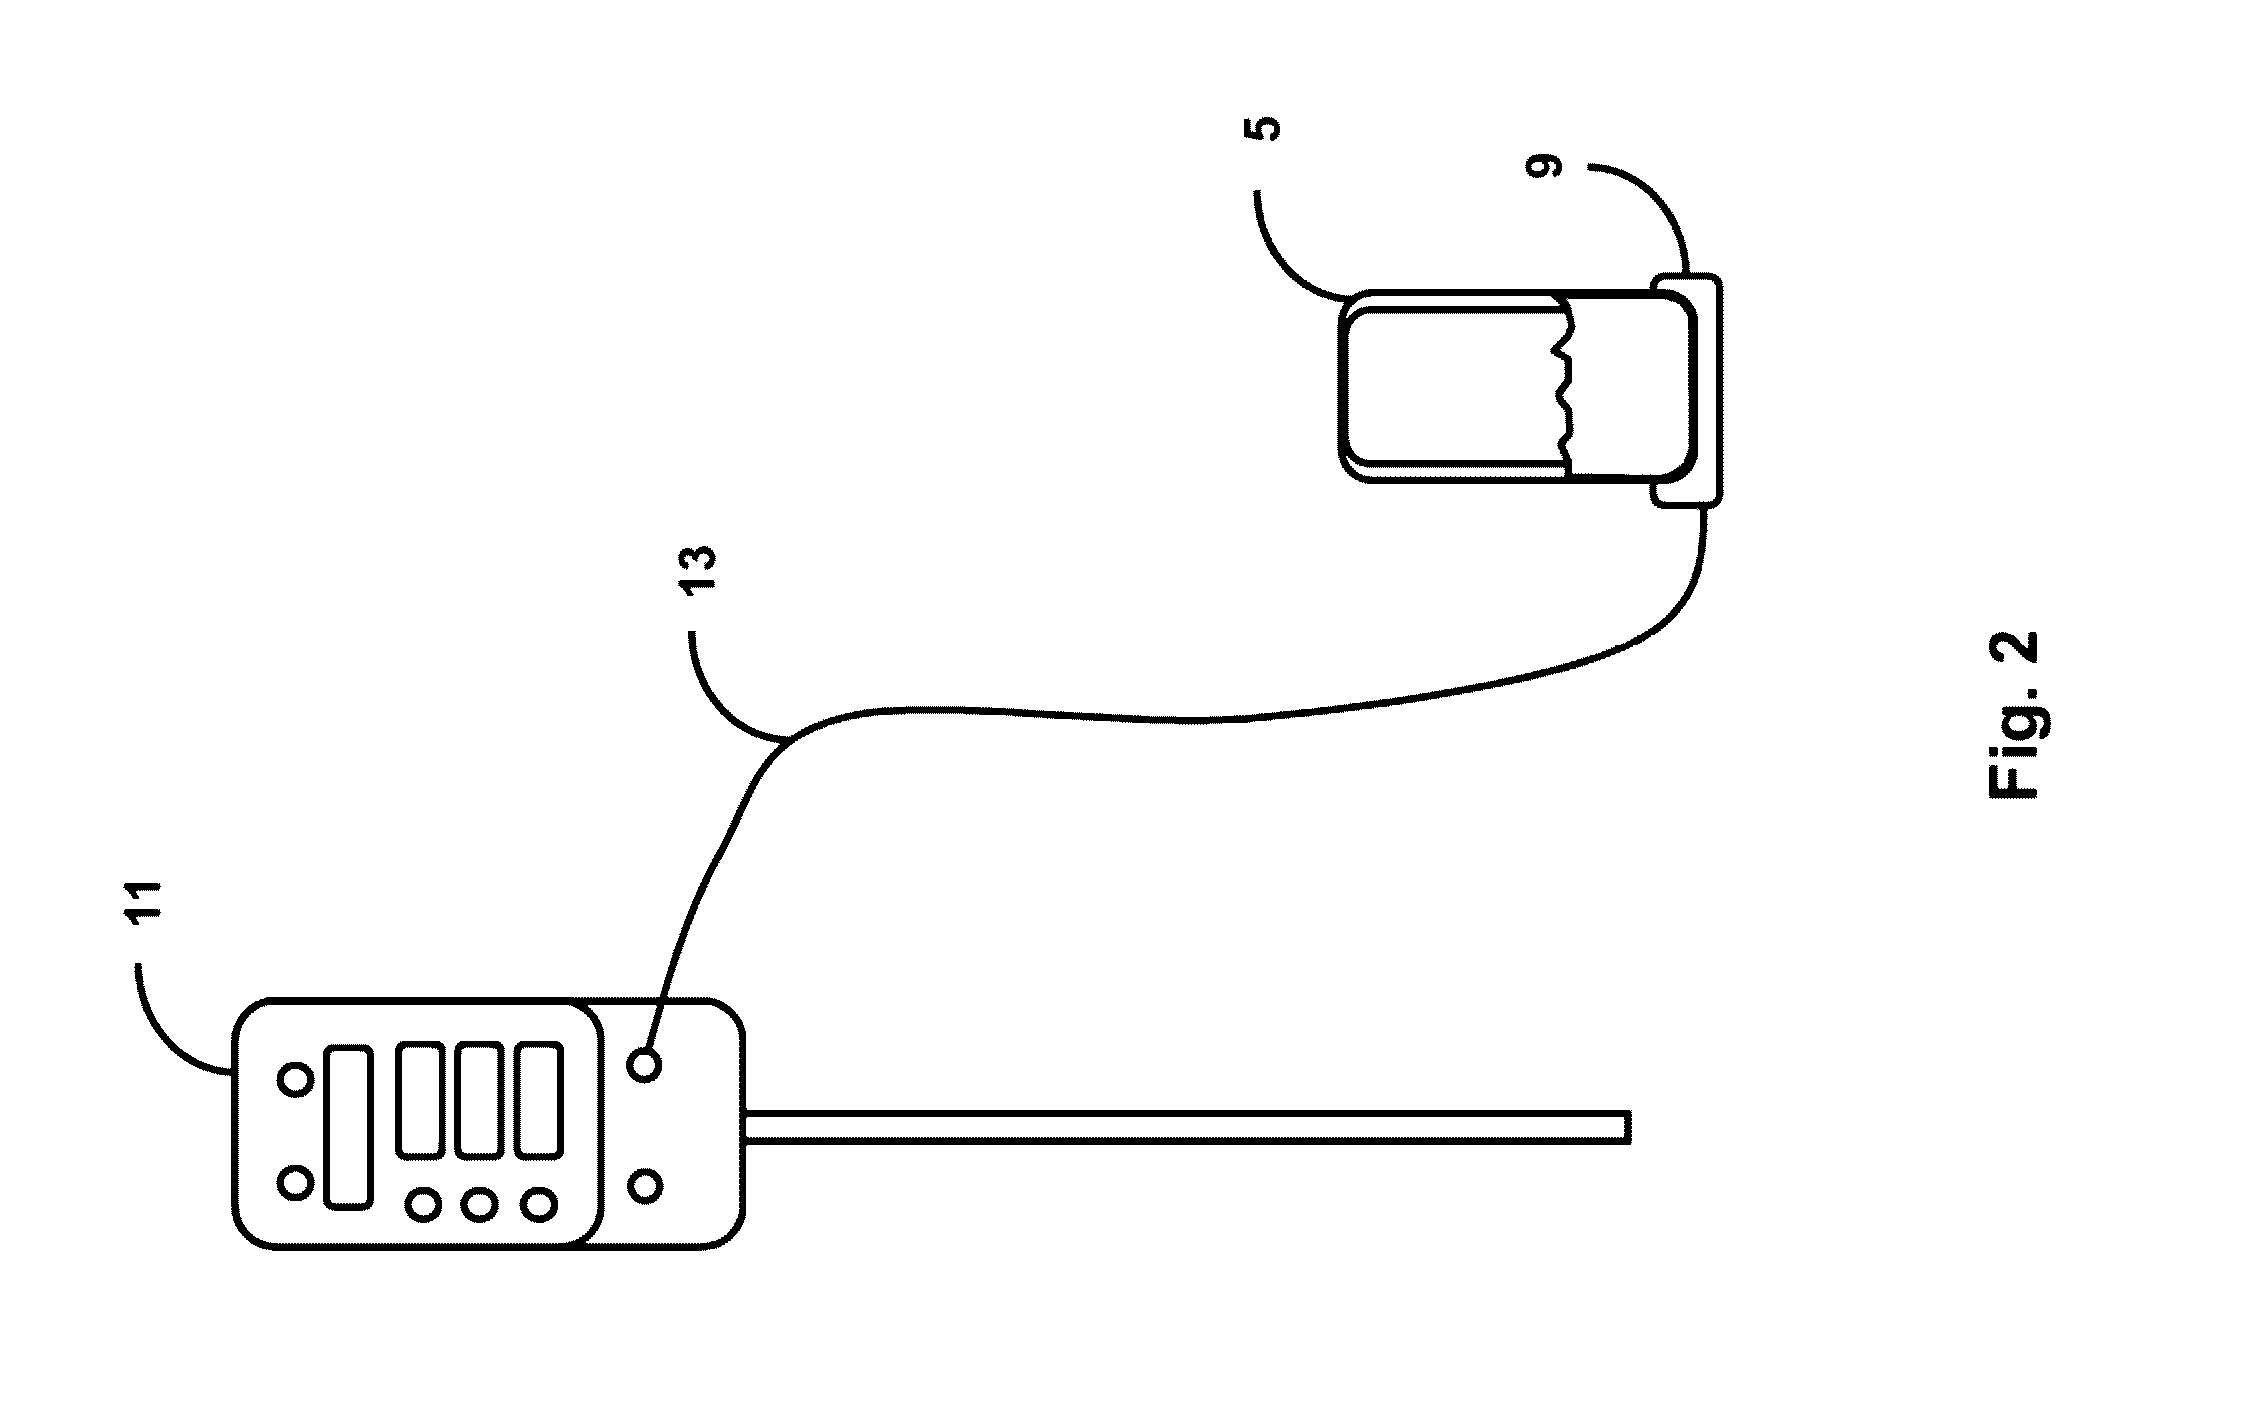 Systems, devices and methods for draining and analyzing bodily fluids